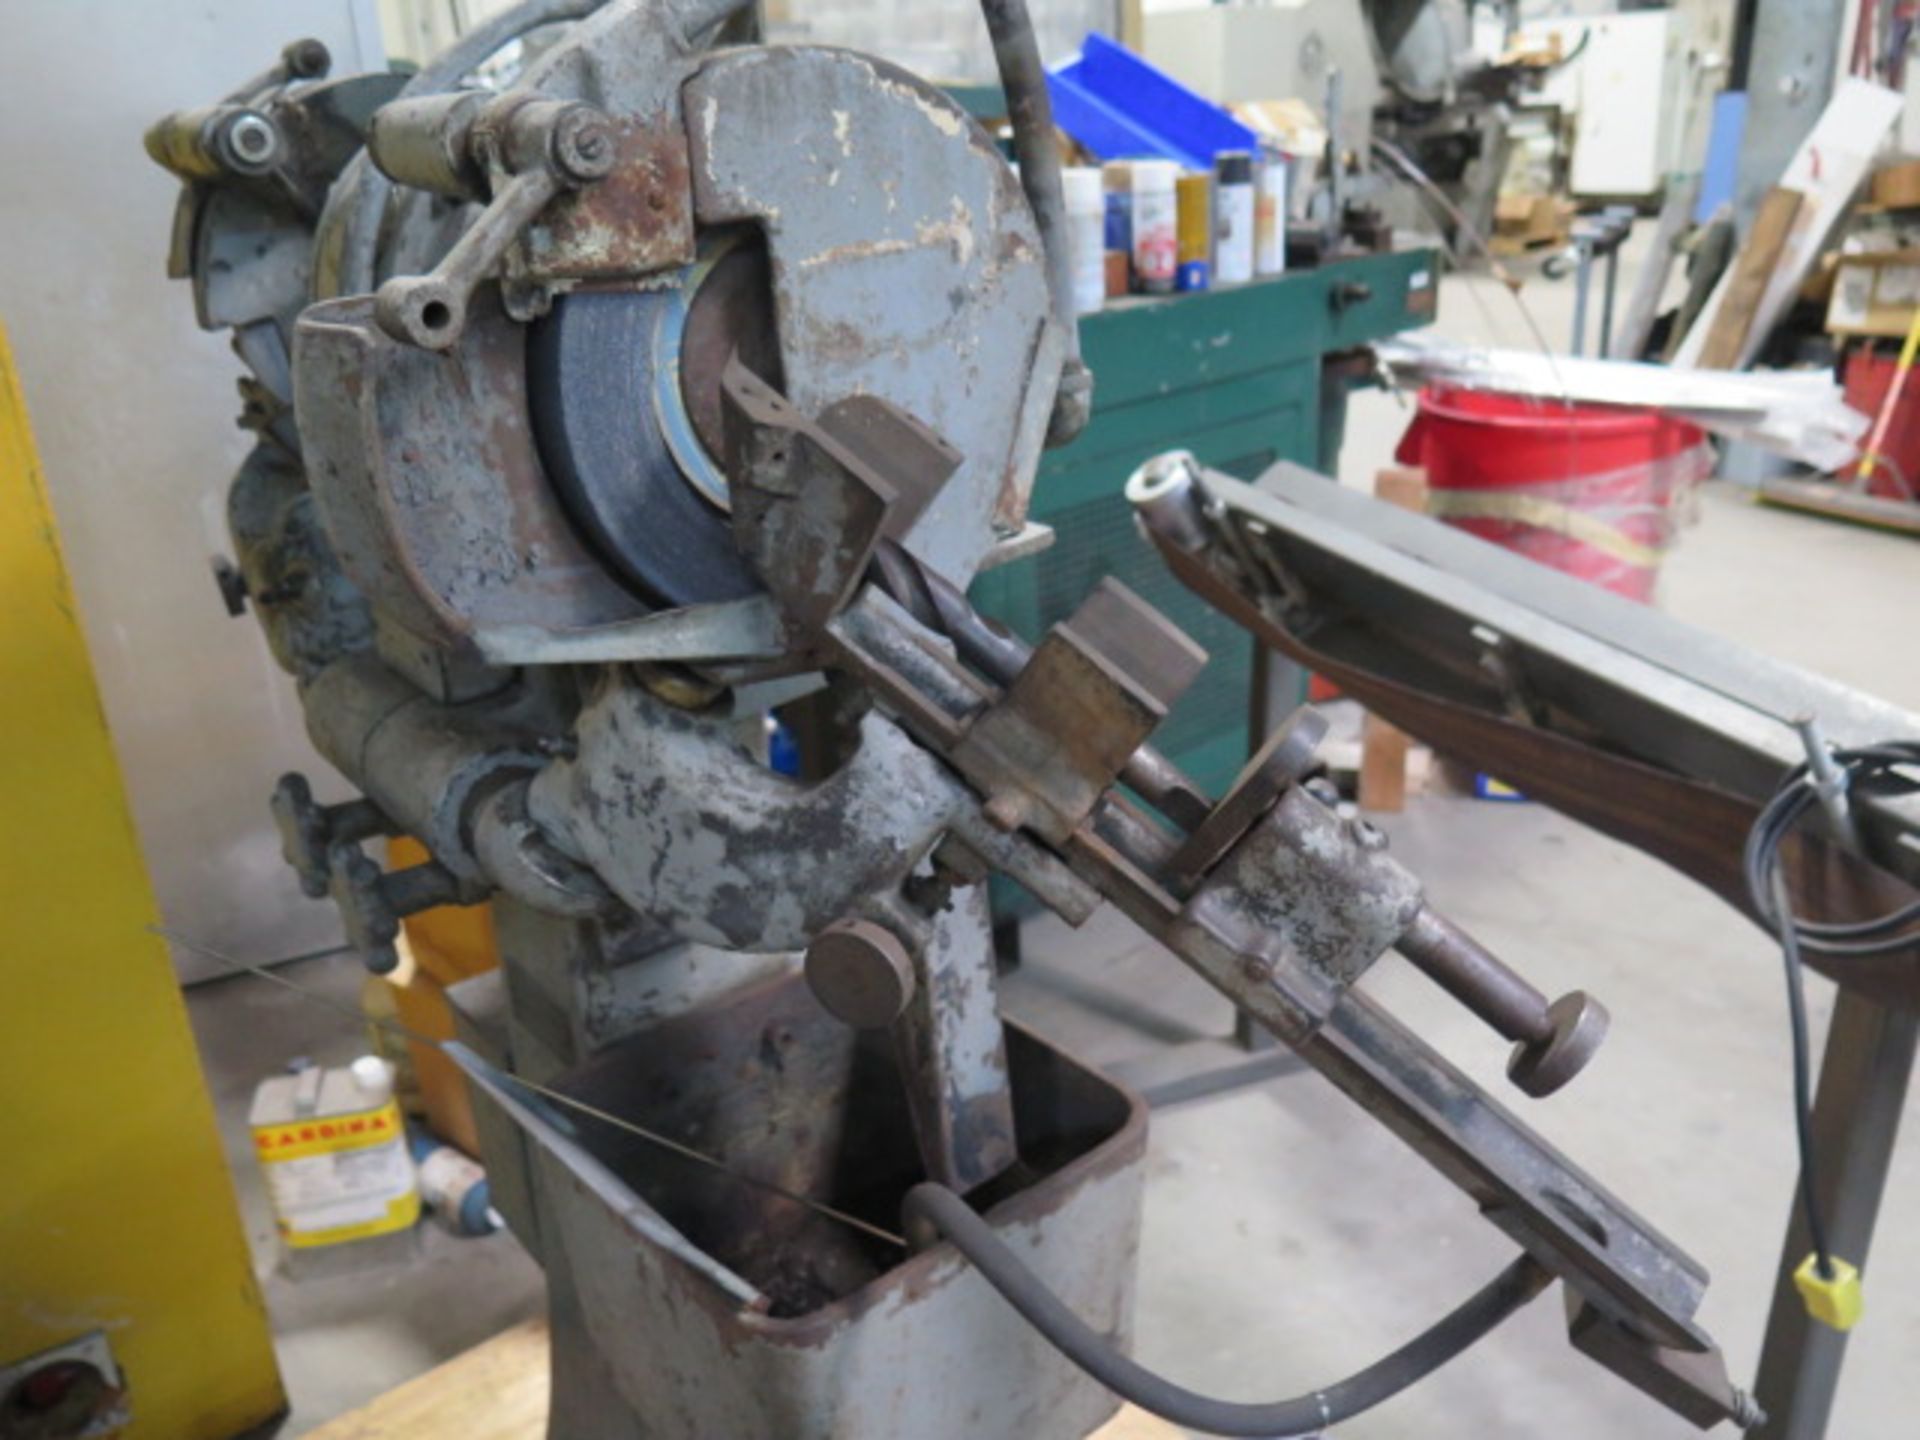 Gallmeyer & Livingston mdl. 66A Large Diameter Drill Sharpener (SOLD AS-IS - NO WARRANTY) - Image 2 of 6